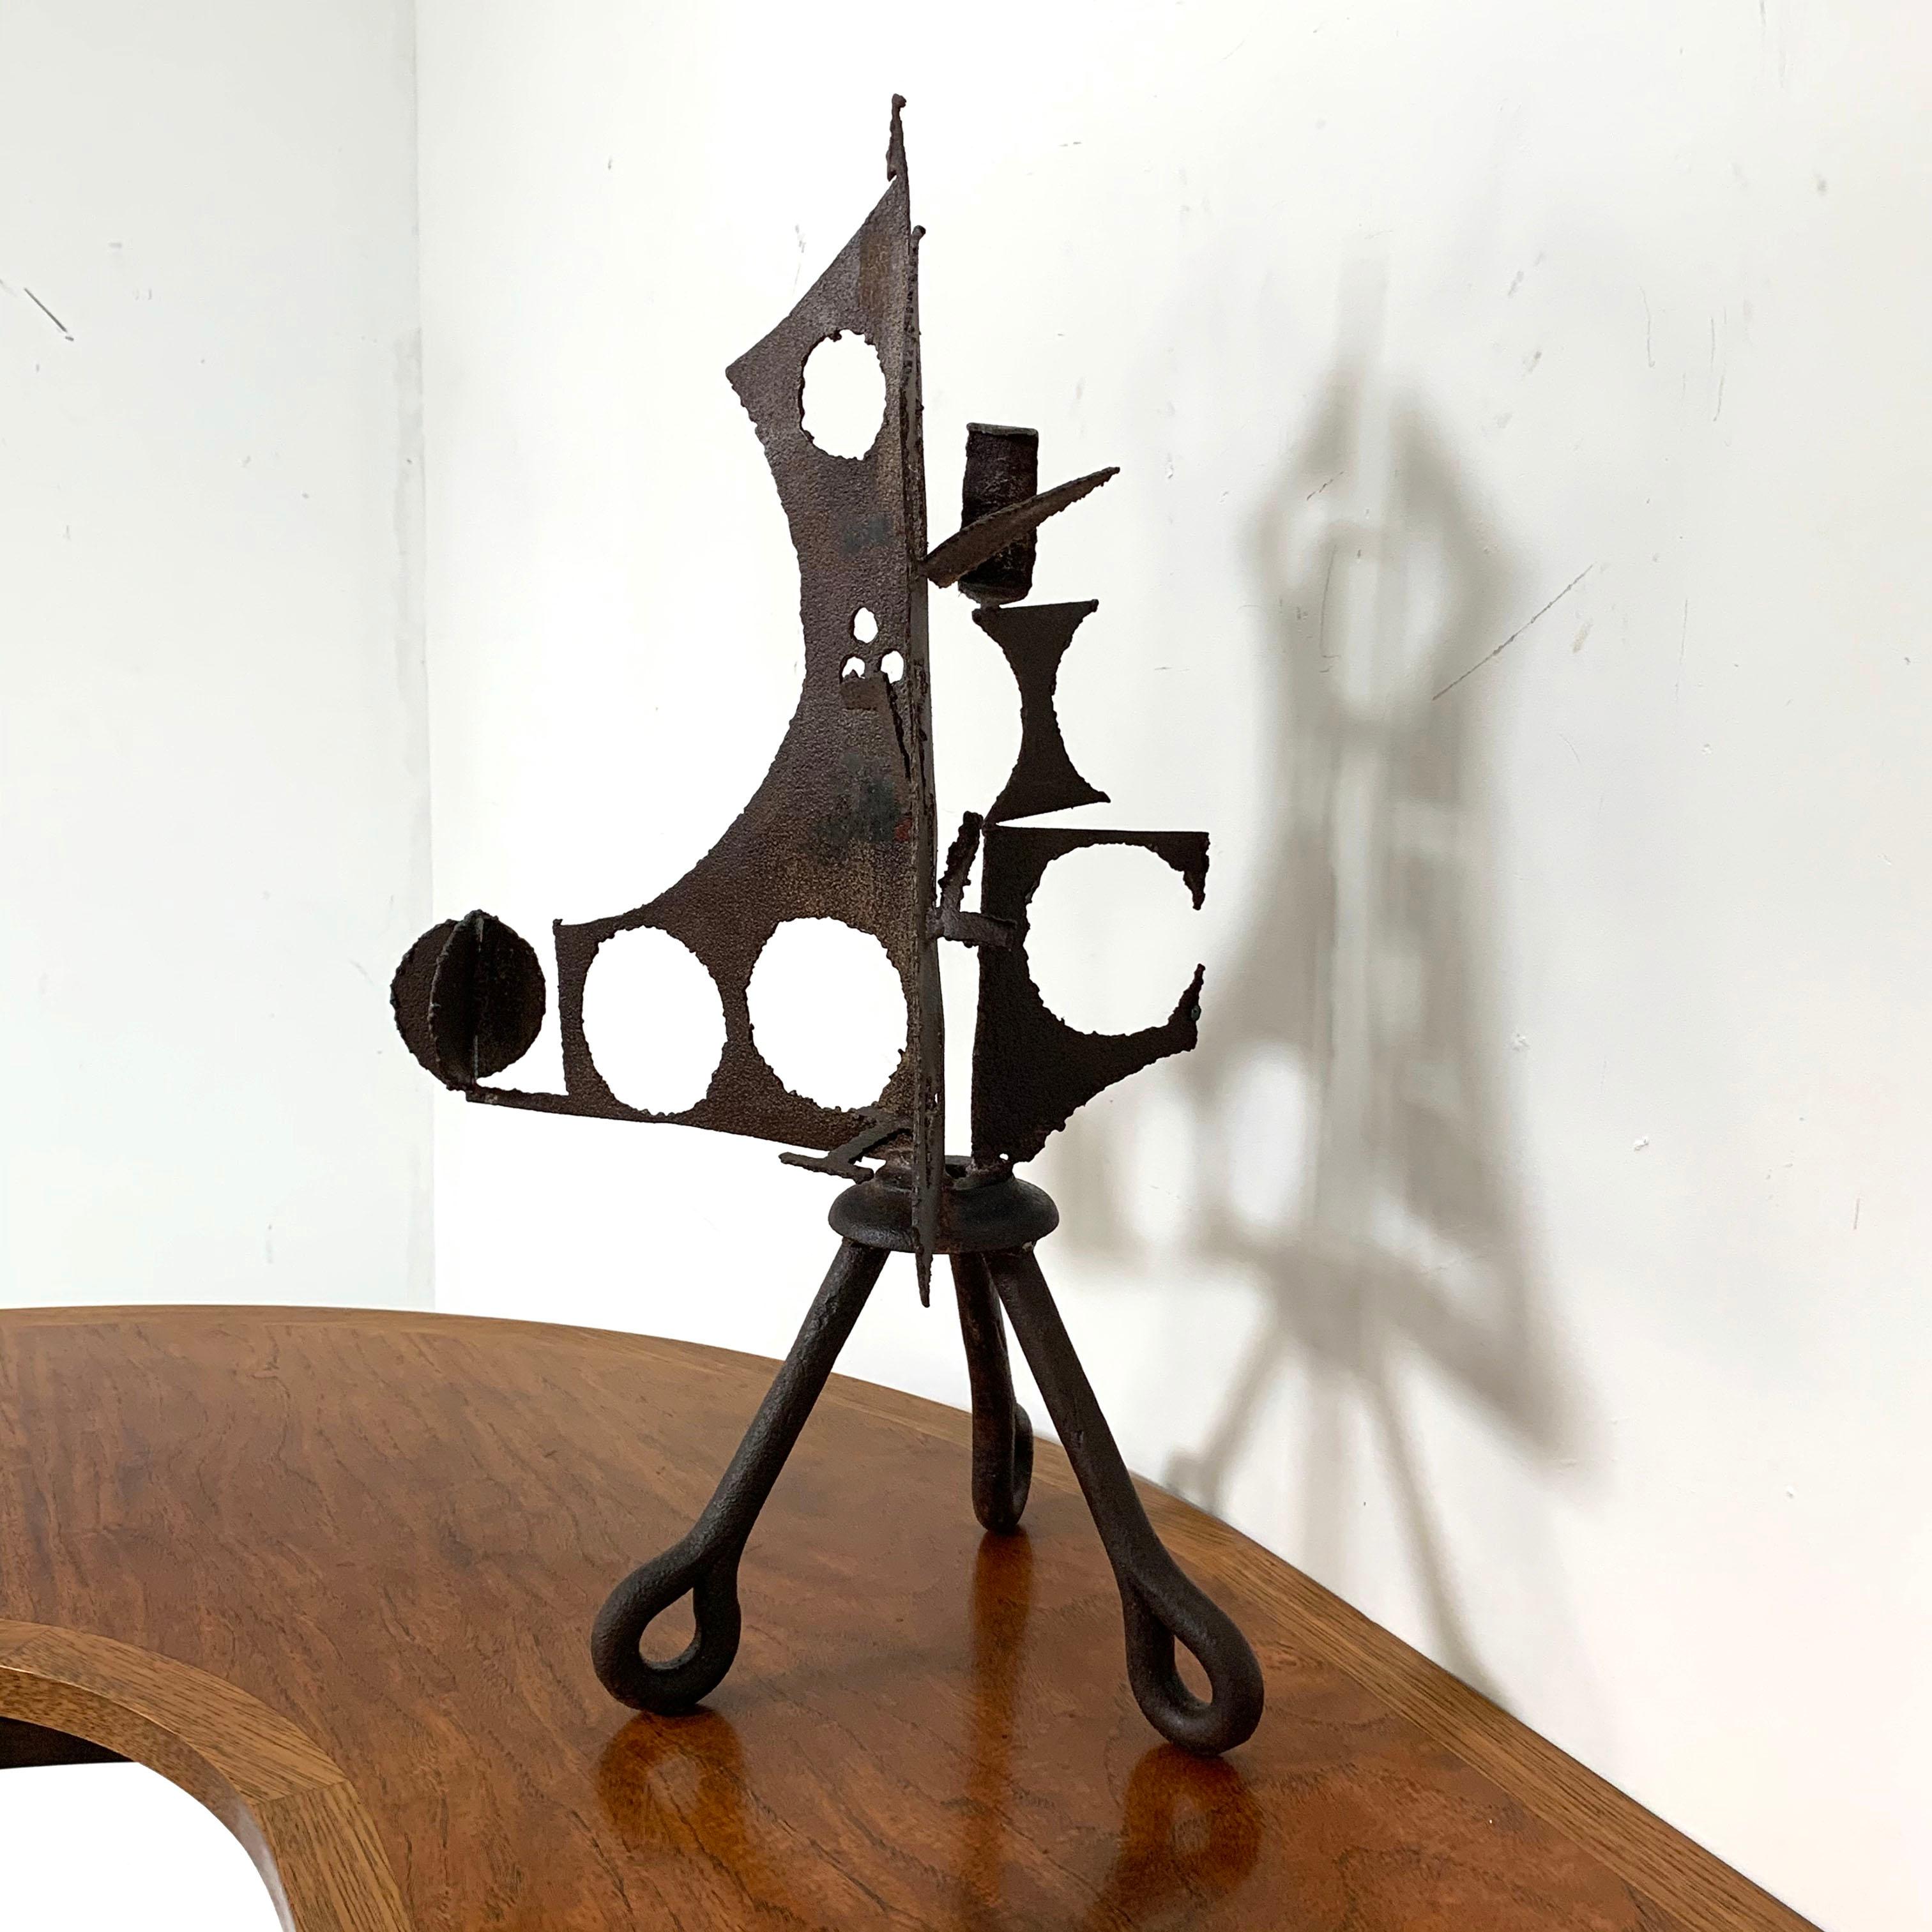 A welded steel sculpture by artist John Livermore of Acton, MA, circa 1970. Torch cut corten steel with tripod legs of castoff ring bolt plugs from the nearby Harris Granite Quarry. Livermore and his wife Elaine were well known artists in this